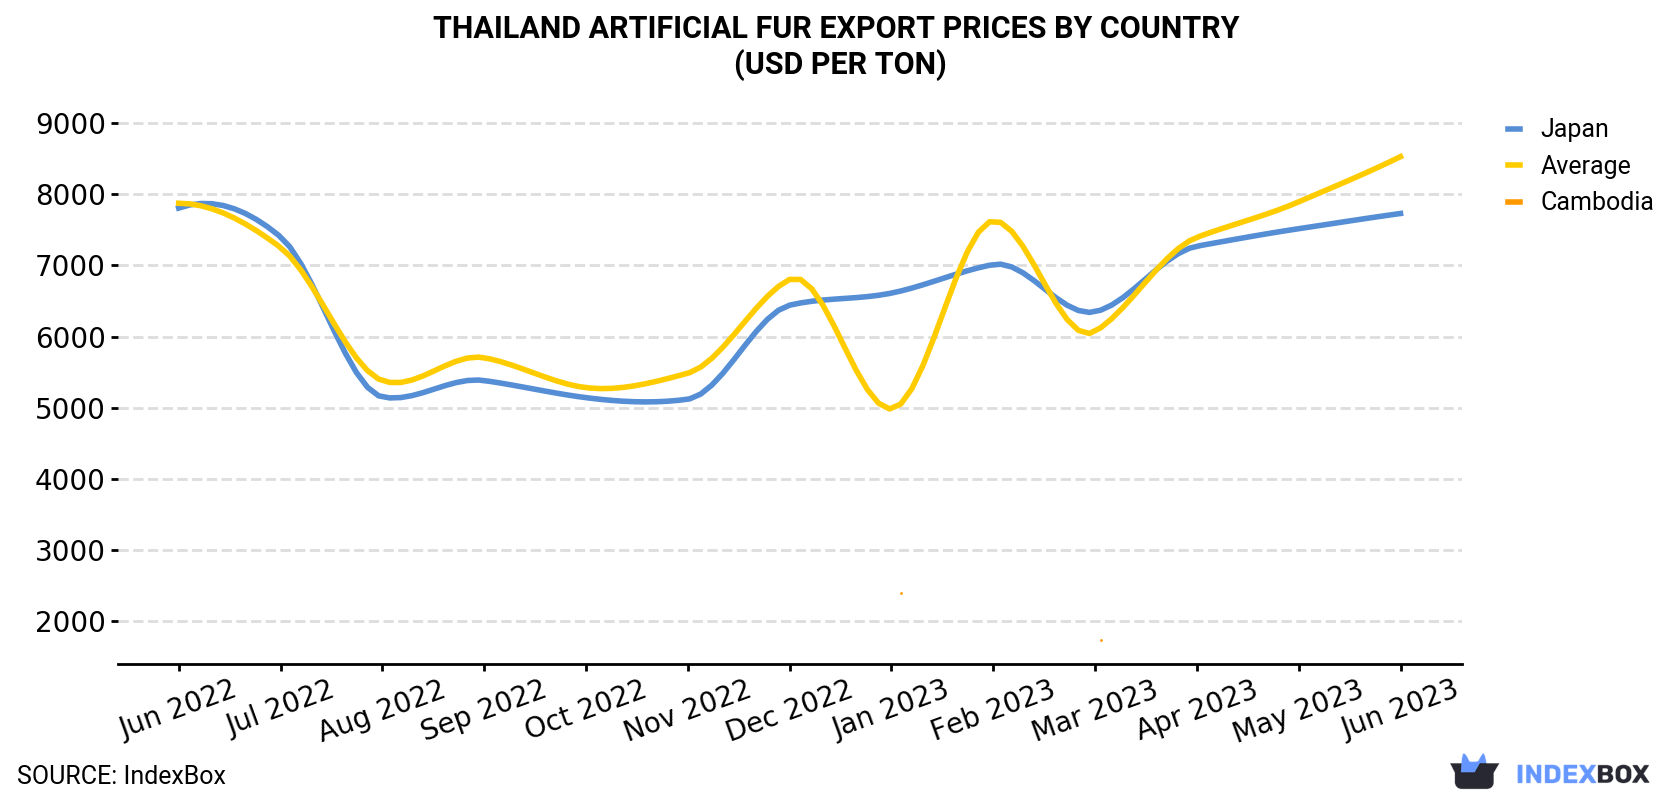 Thailand Artificial Fur Export Prices By Country (USD Per Ton)